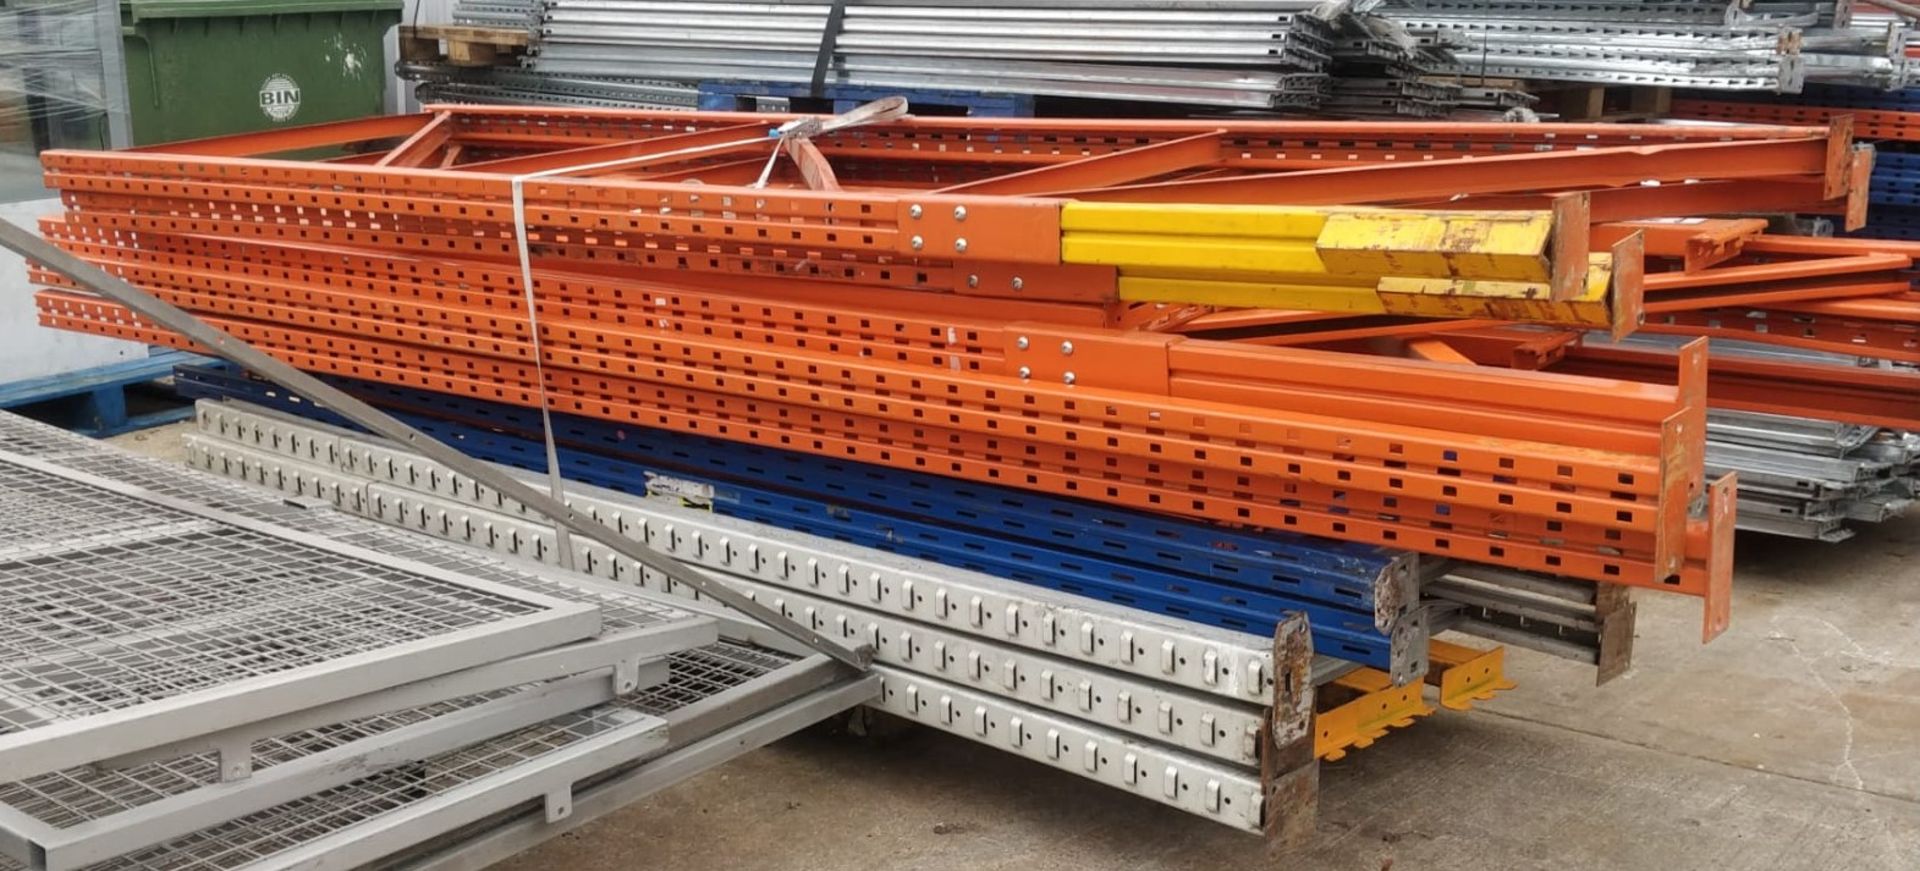 7 x Bays of Assort Pallet Racking - Includes 10 Uprights and 15 Crossbeams - Ref: MPC - CL011 - - Image 2 of 7